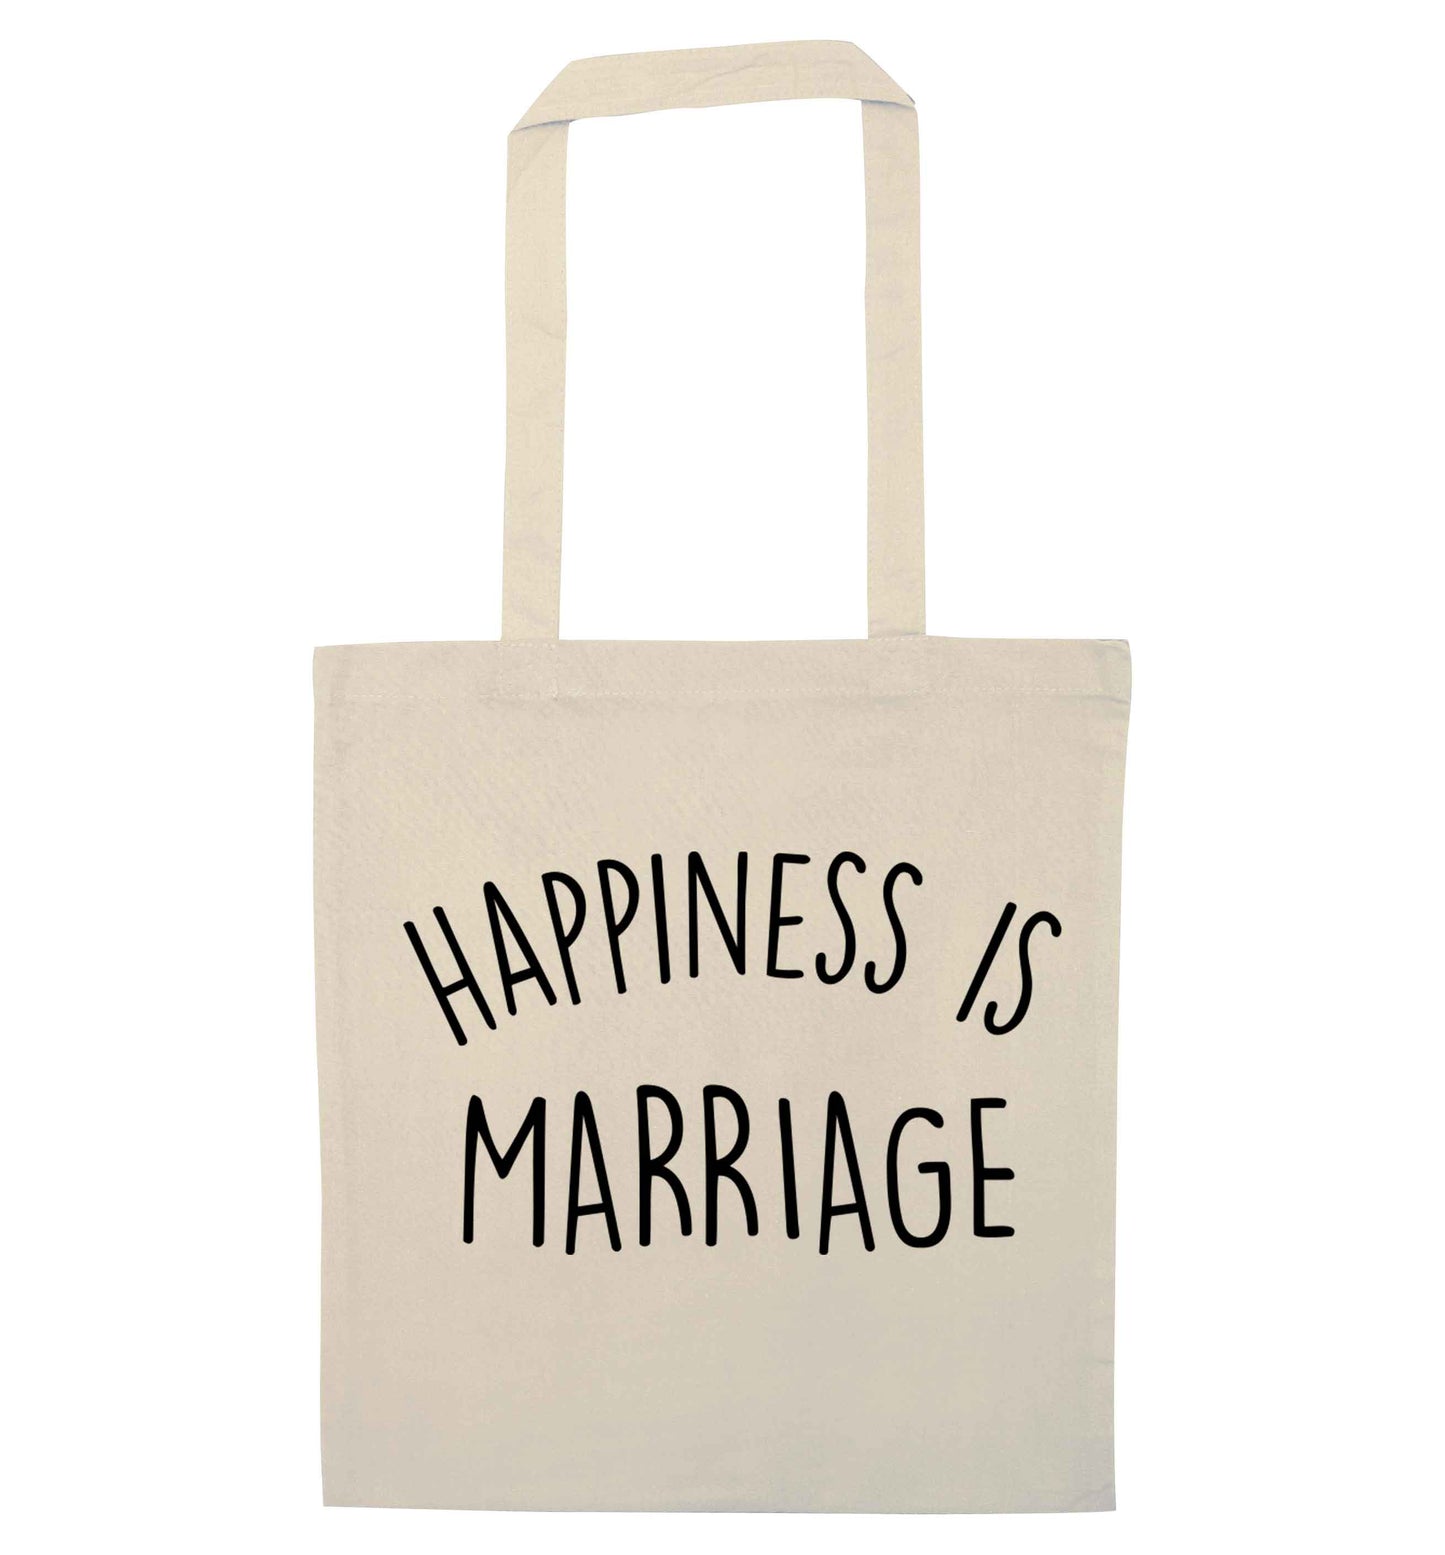 Happiness is wedding planning natural tote bag